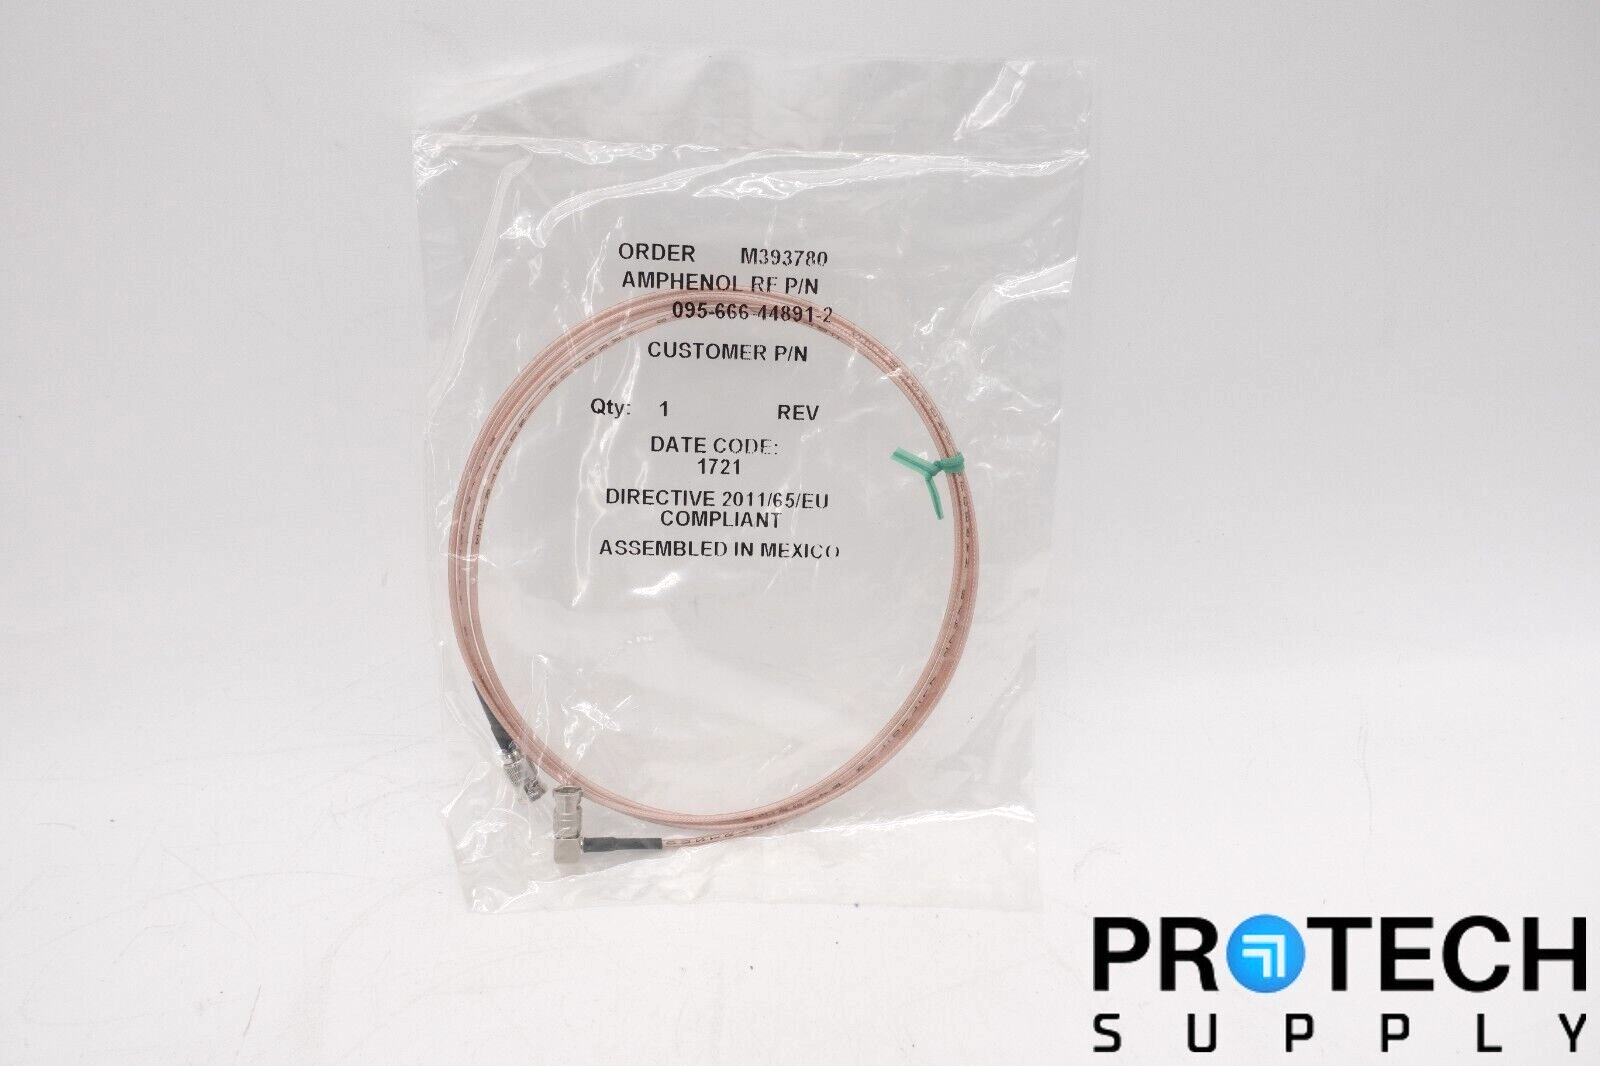 Amphenol RF 095-666-44891-2 Cable NEW with WARRANT